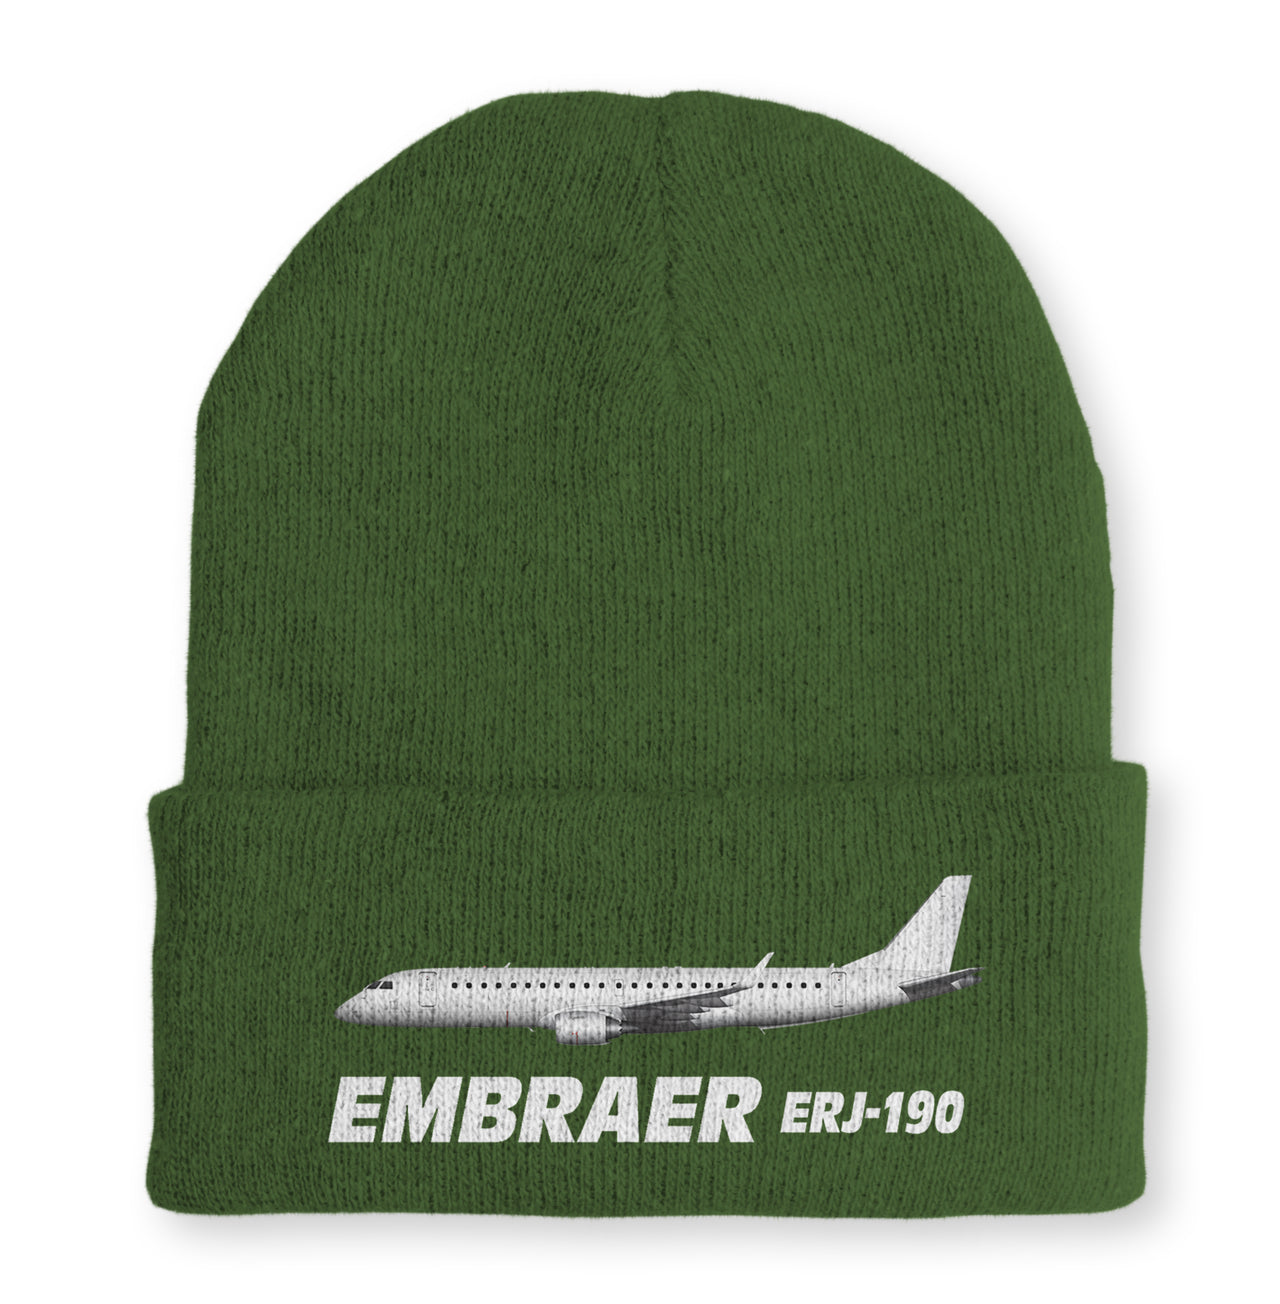 The Embraer ERJ-190 Embroidered Beanies